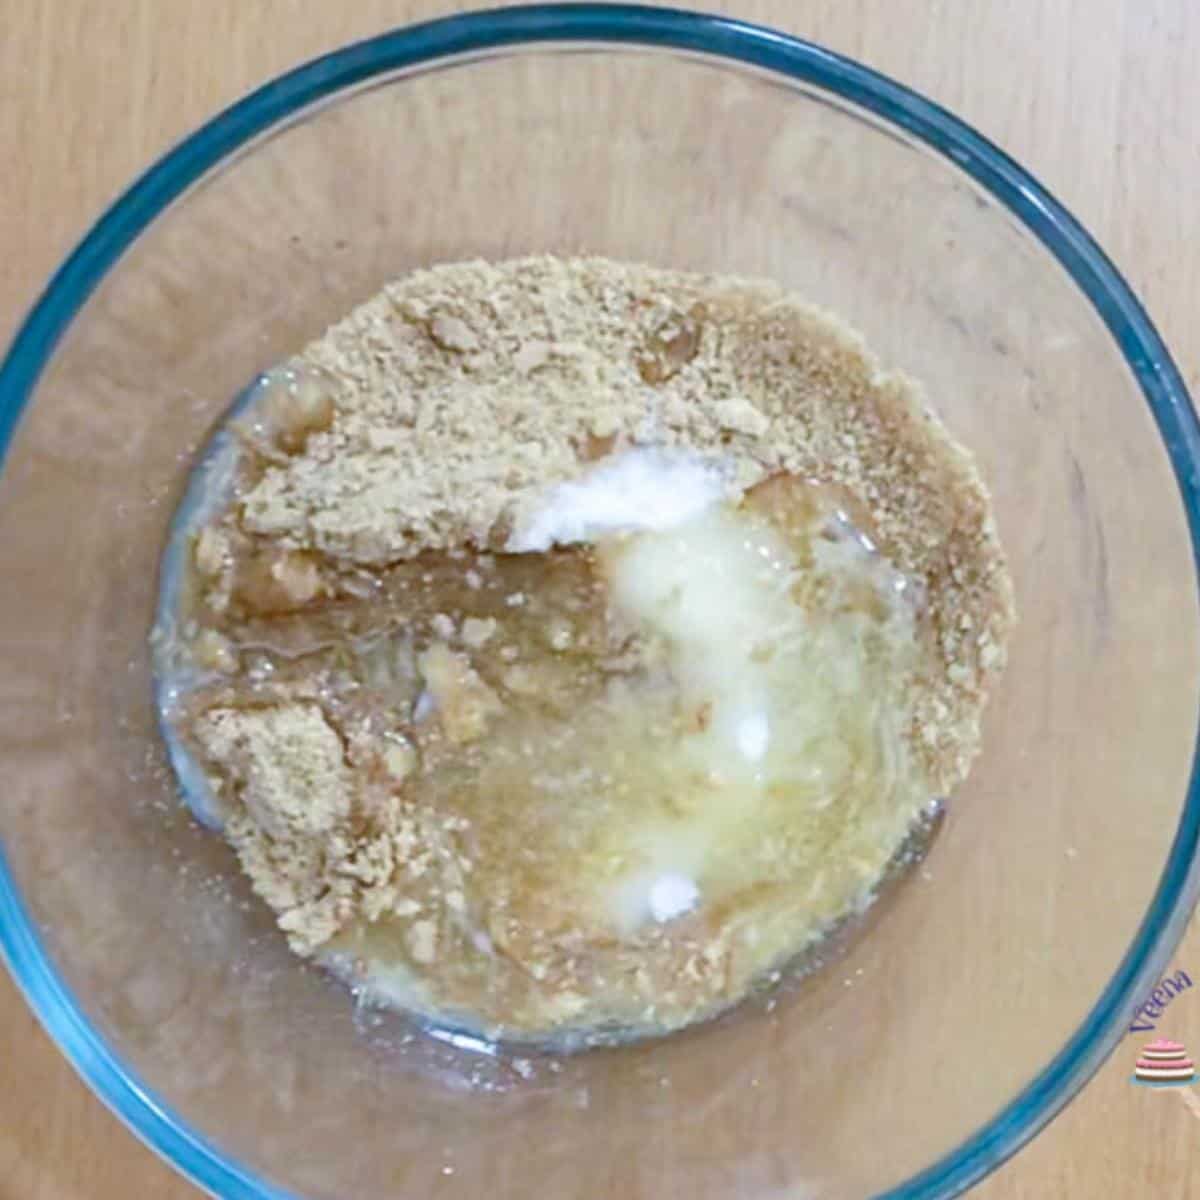 Graham crackers and melted butter in a bowl